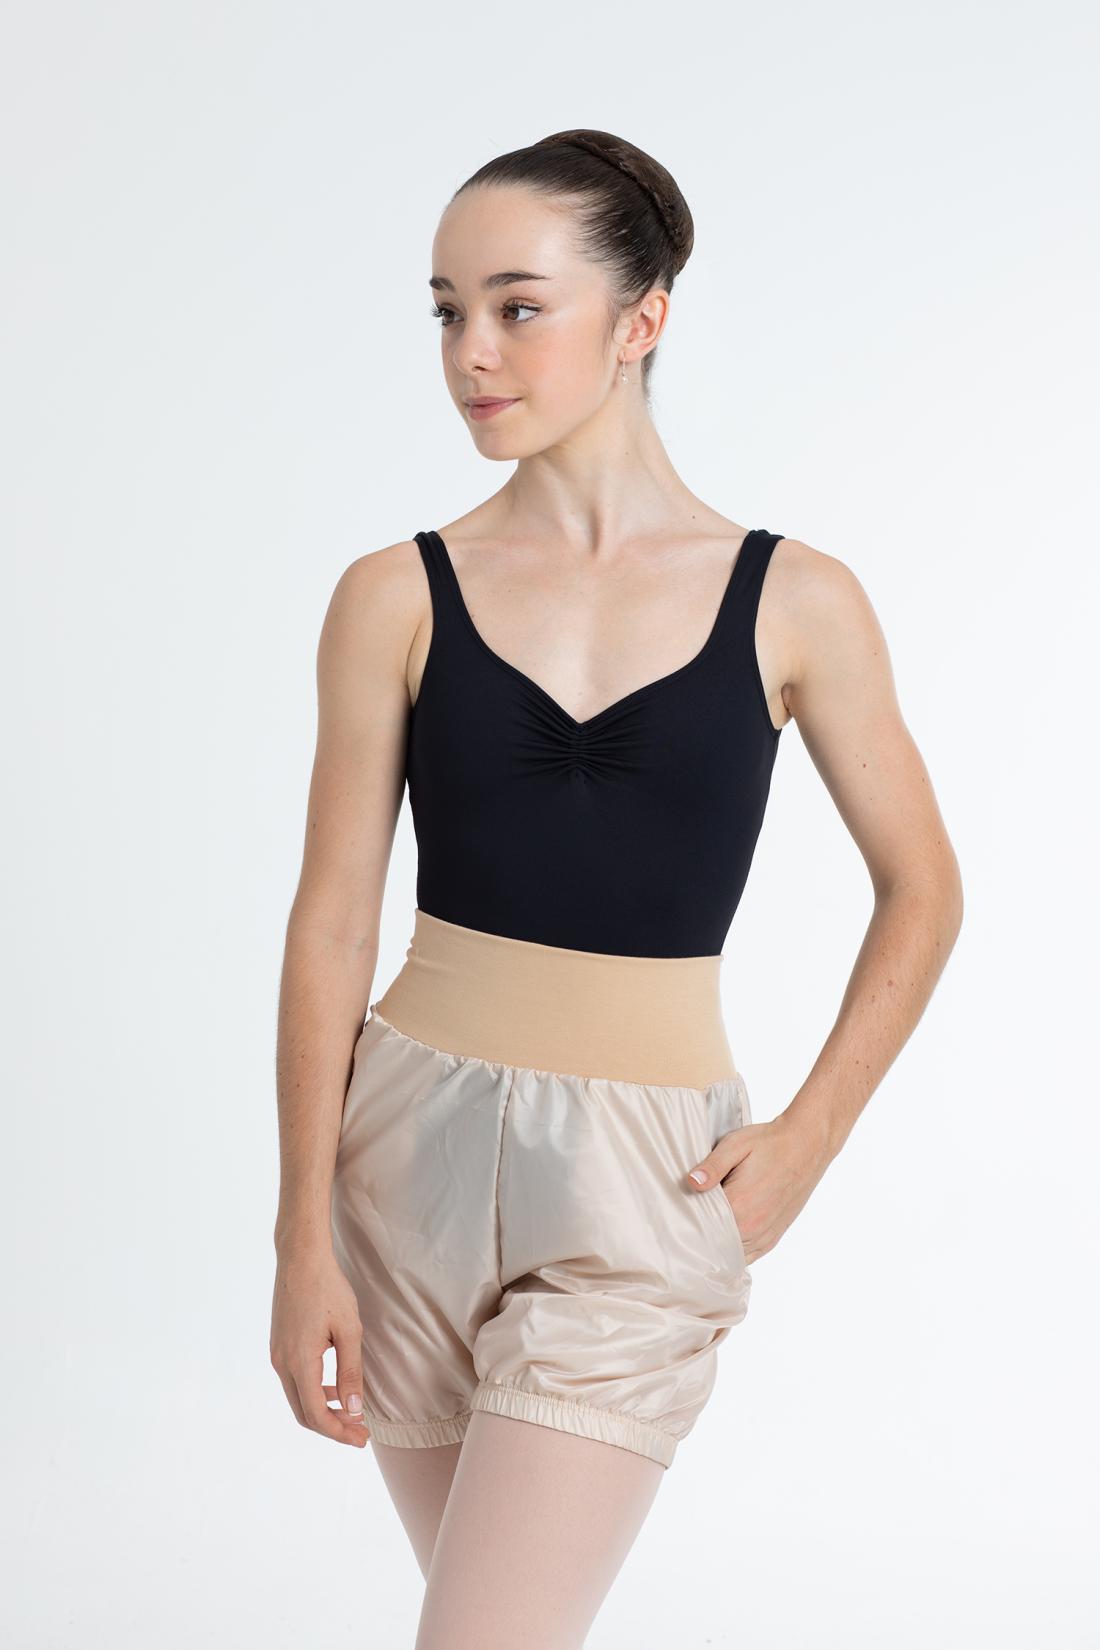 Perspiration Warm up Sweat Shorts with pockets ballet dance